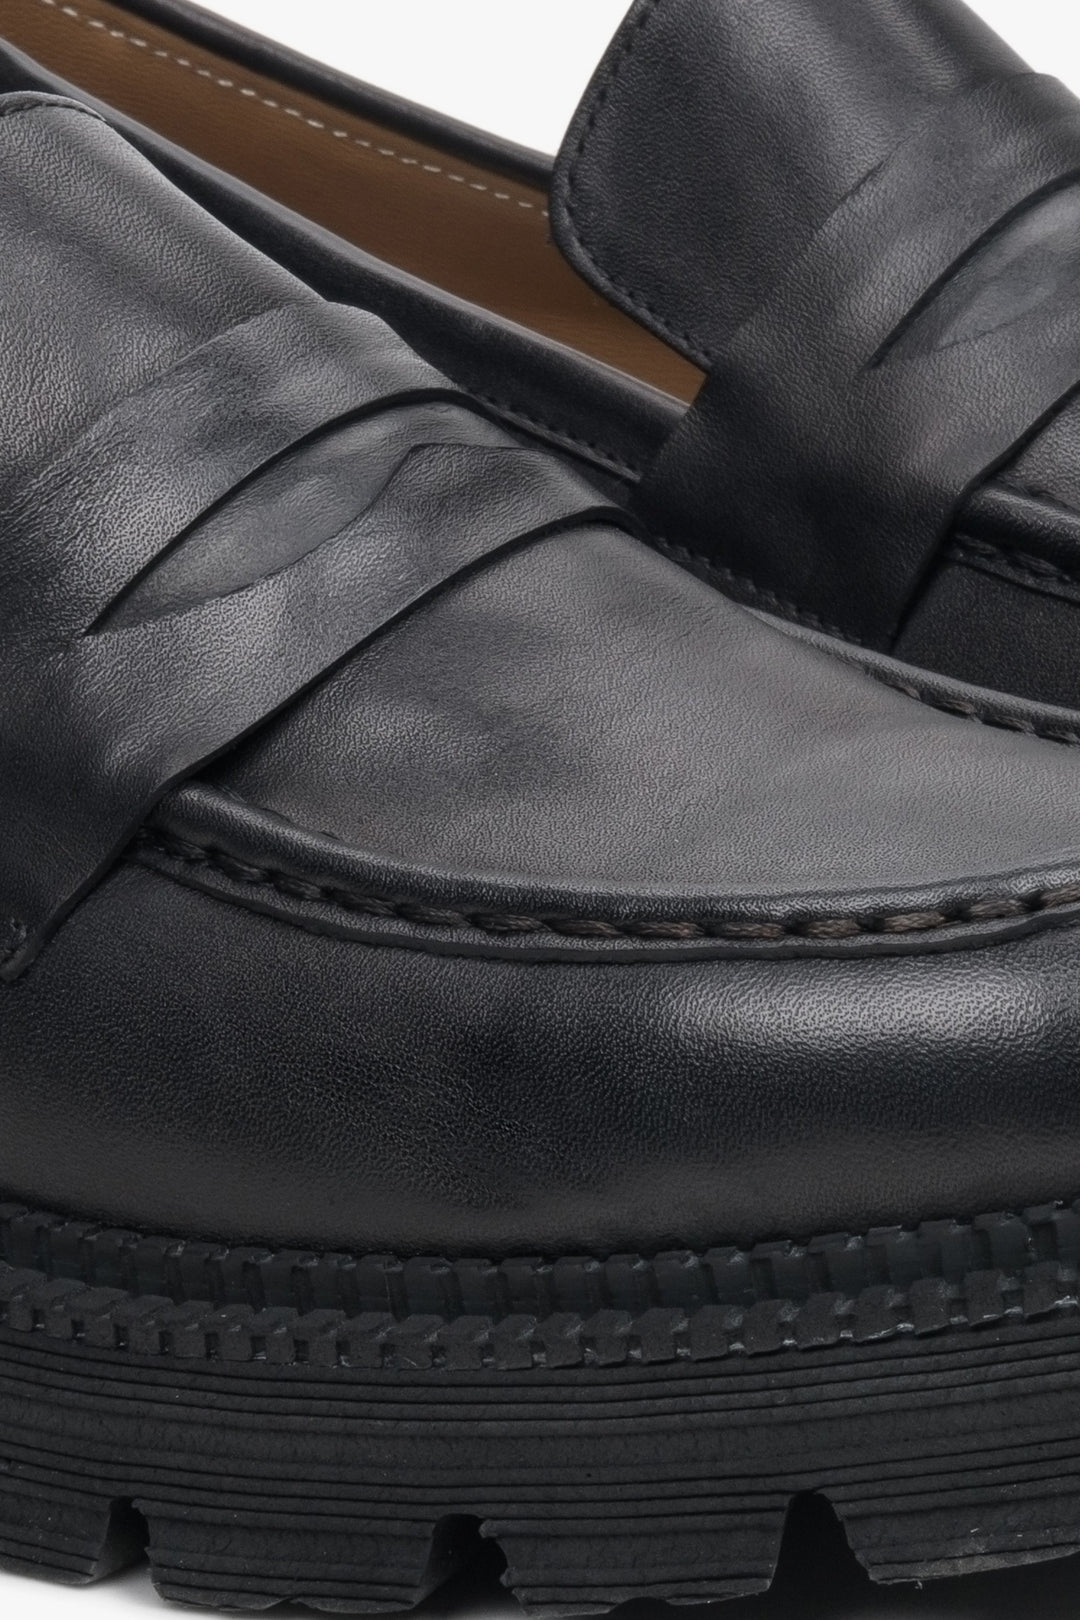 Women's black loafers made of genuine leather by Estro.